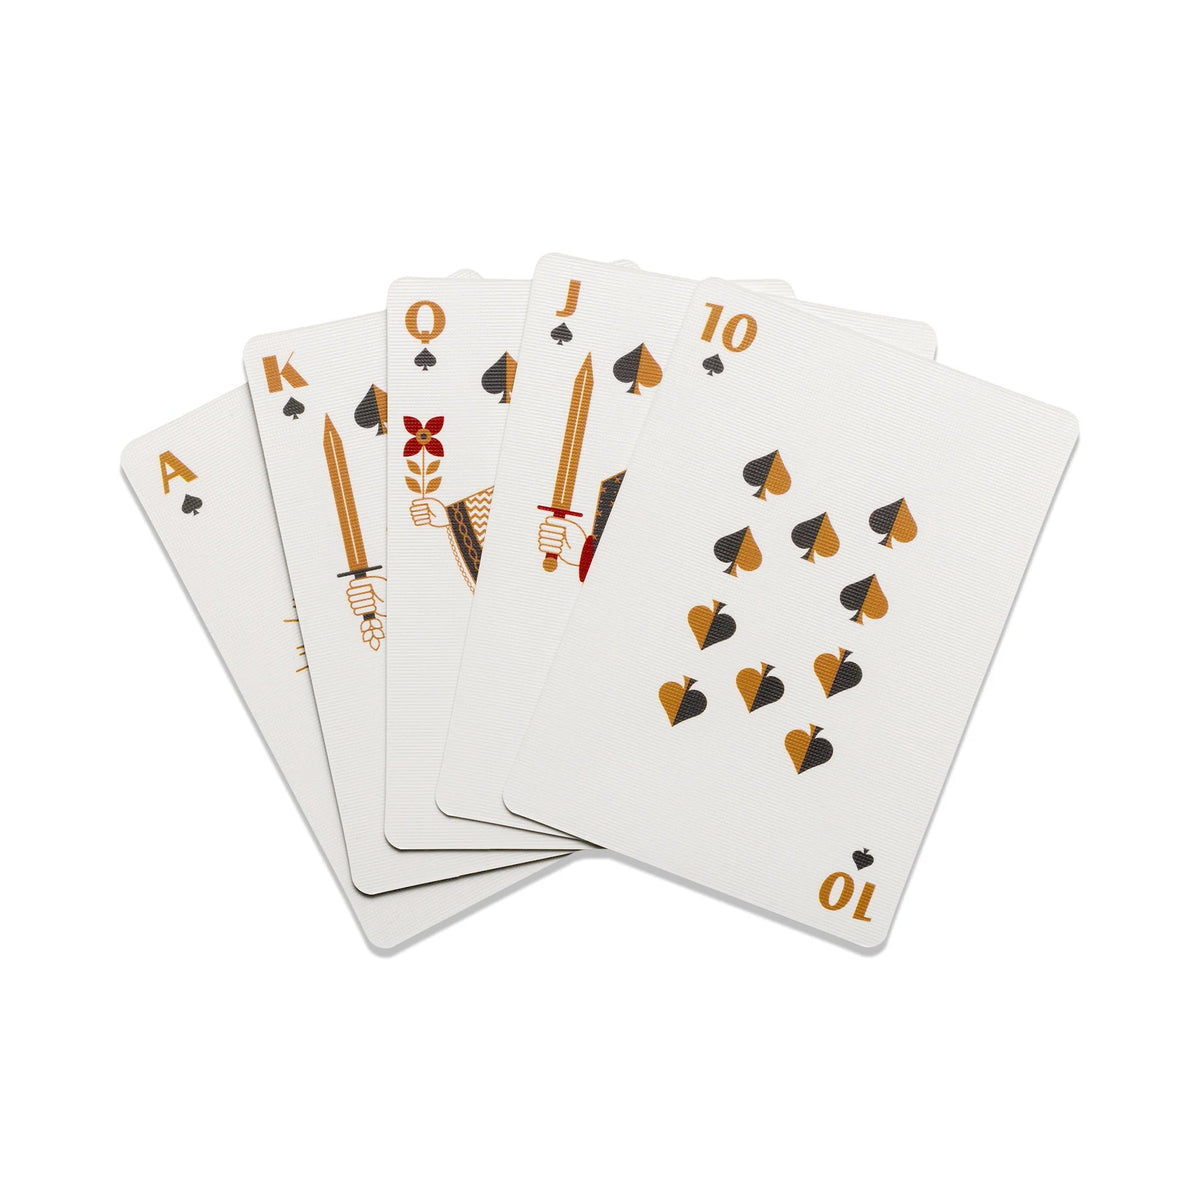 Design WorksPLAYING CARDS - DOGS #same day gift delivery melbourne#